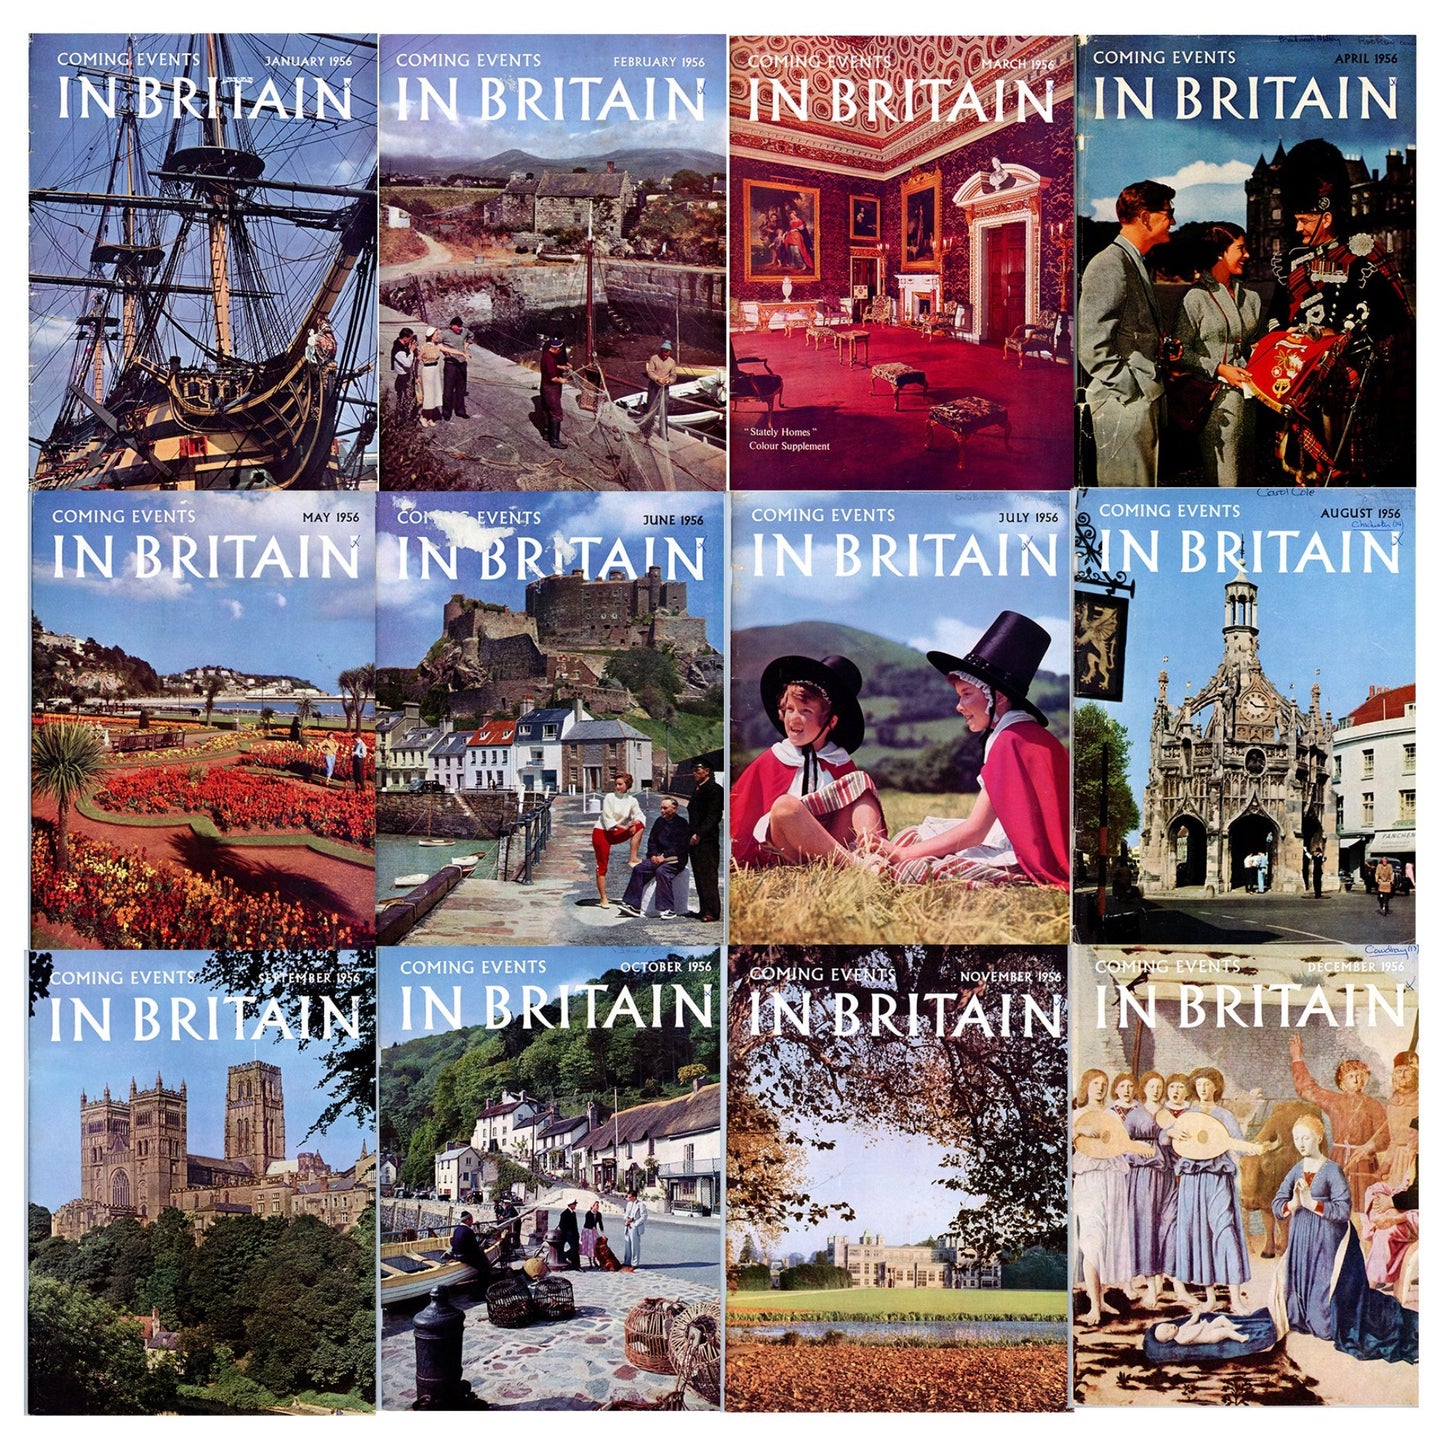 COMING EVENTS IN BRITAIN Vintage Travel Magazine Full Year (12 Issues) Copyright © 1956